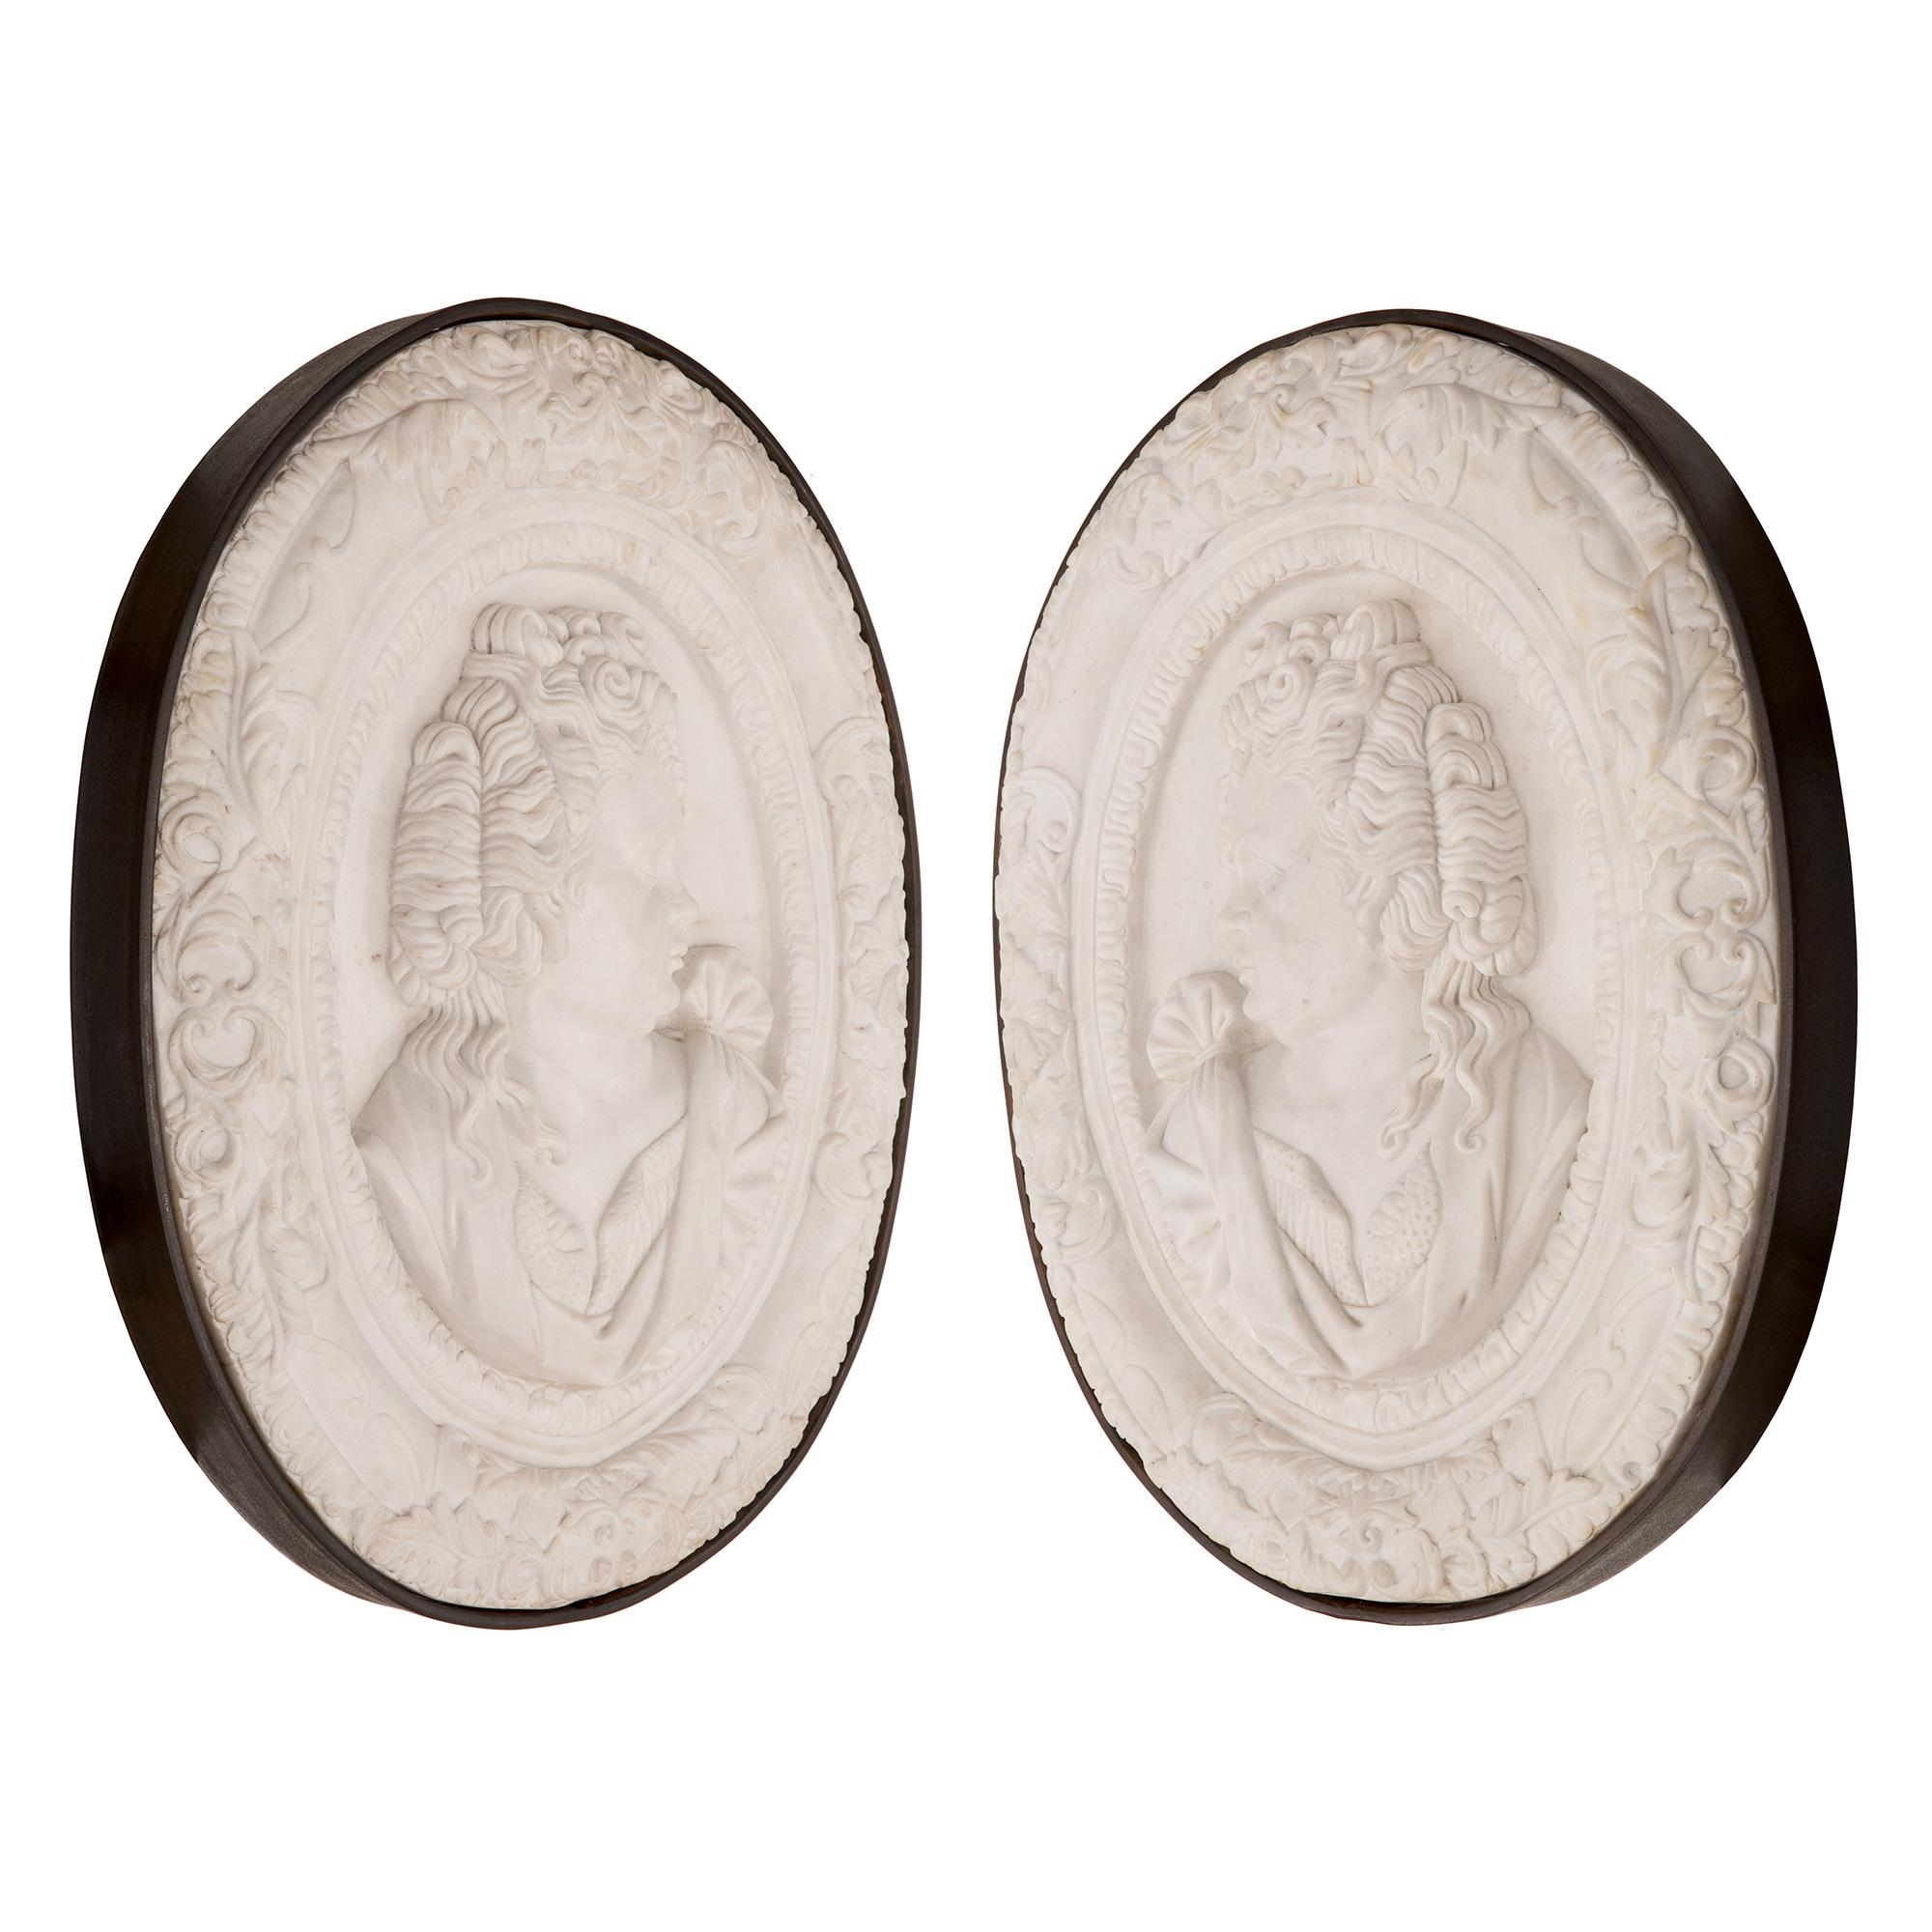 A sensational and extremely well detailed true pair of Italian 19th century white Carrara marble and iron decorative wall plaques. Each thick solid white Carrara marble plaque is framed within a fine iron border. Each central oval plaque displays a